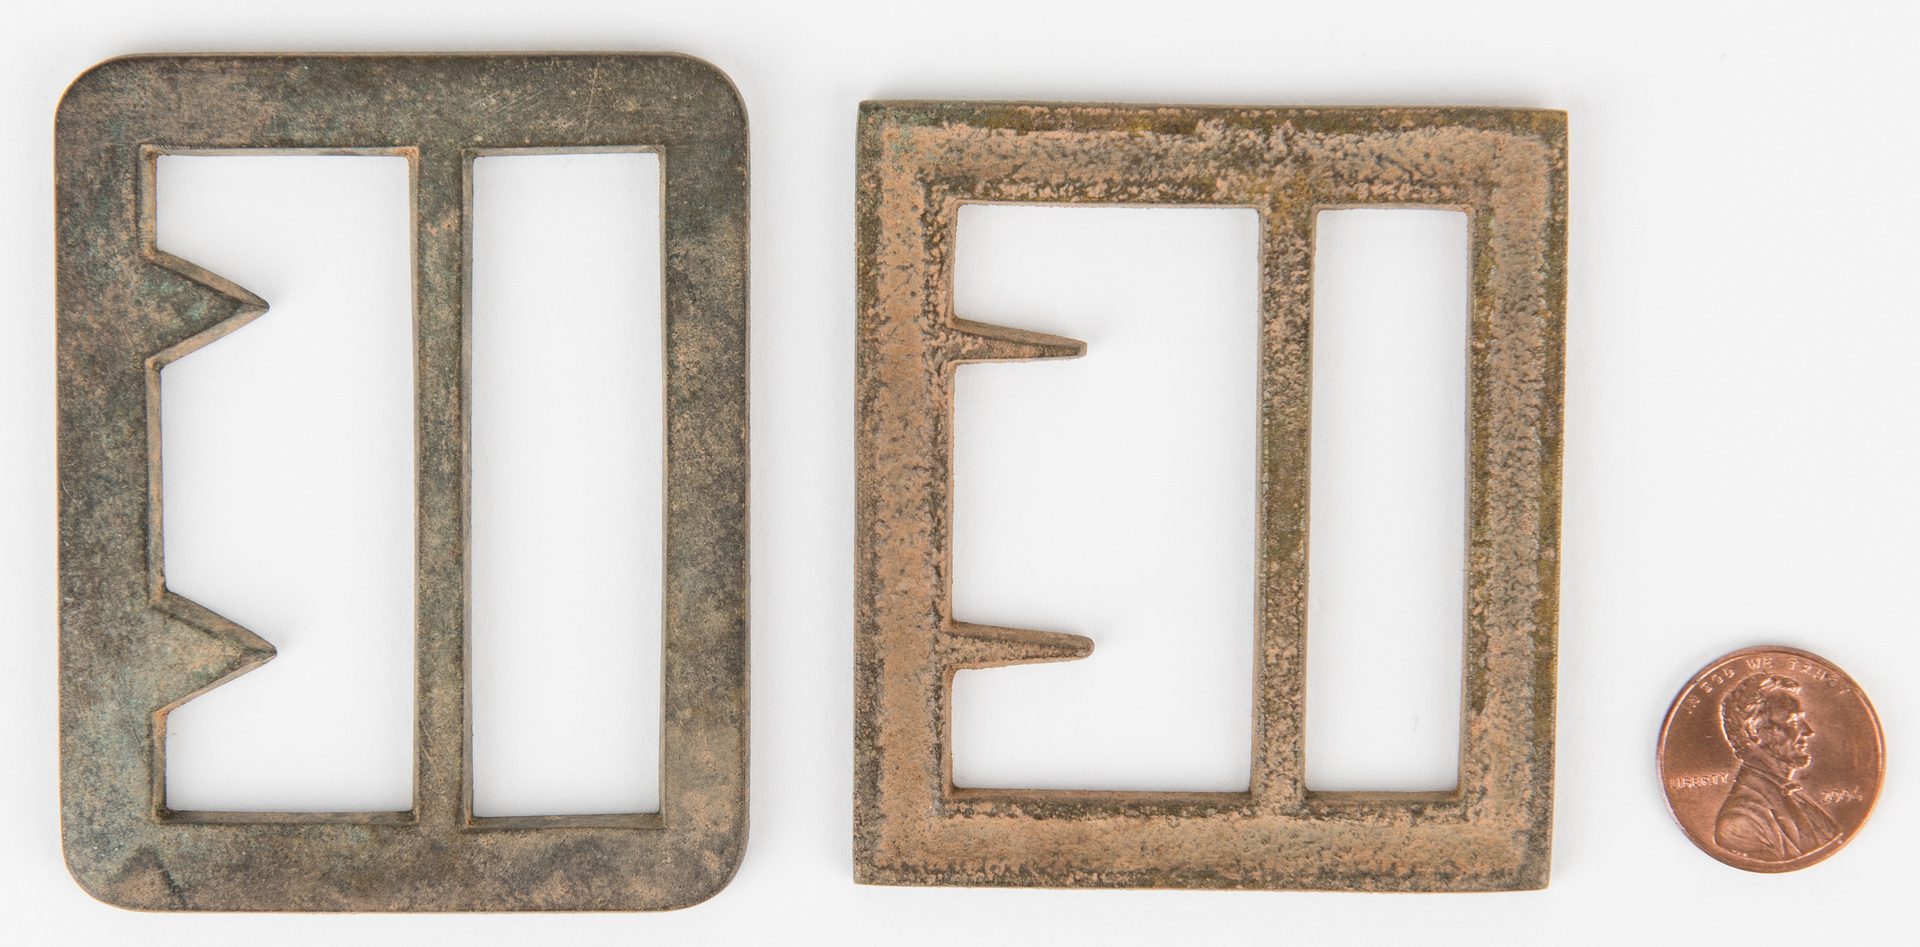 Lot 272: 2 Confederate Frame Buckles, incl. Gutterback, Beveled Edge